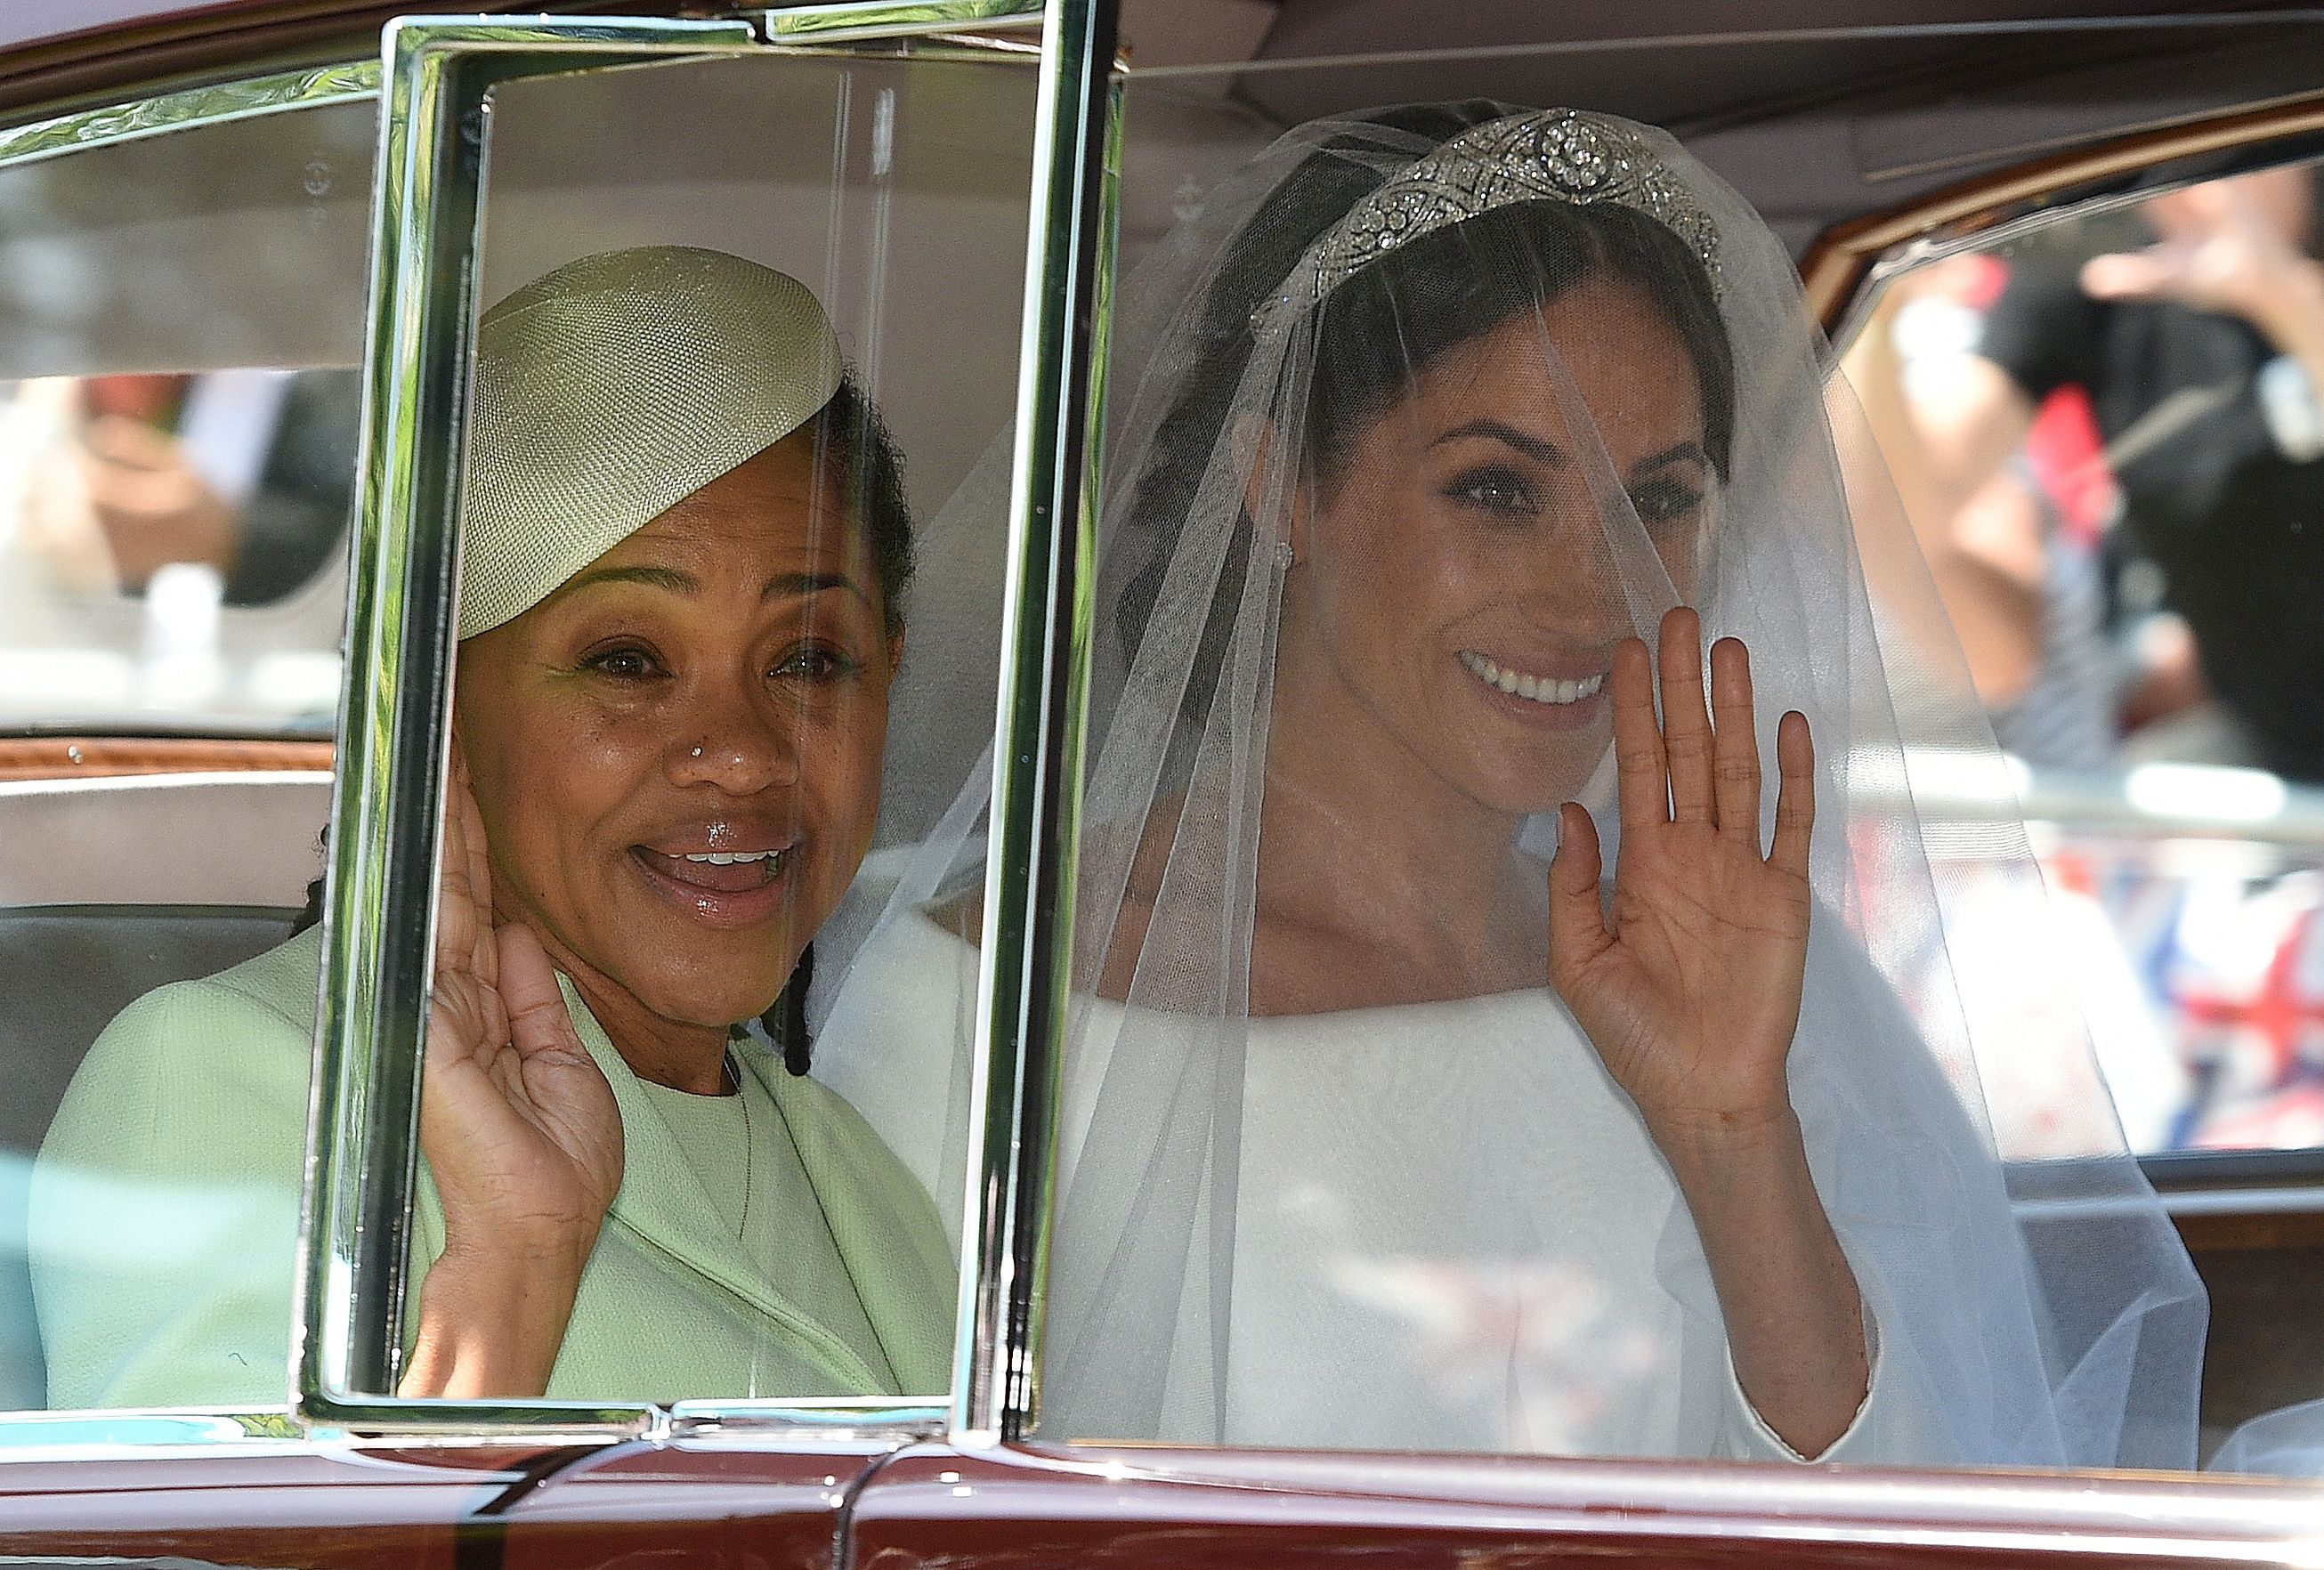 Meghan and her mother royal wedding 